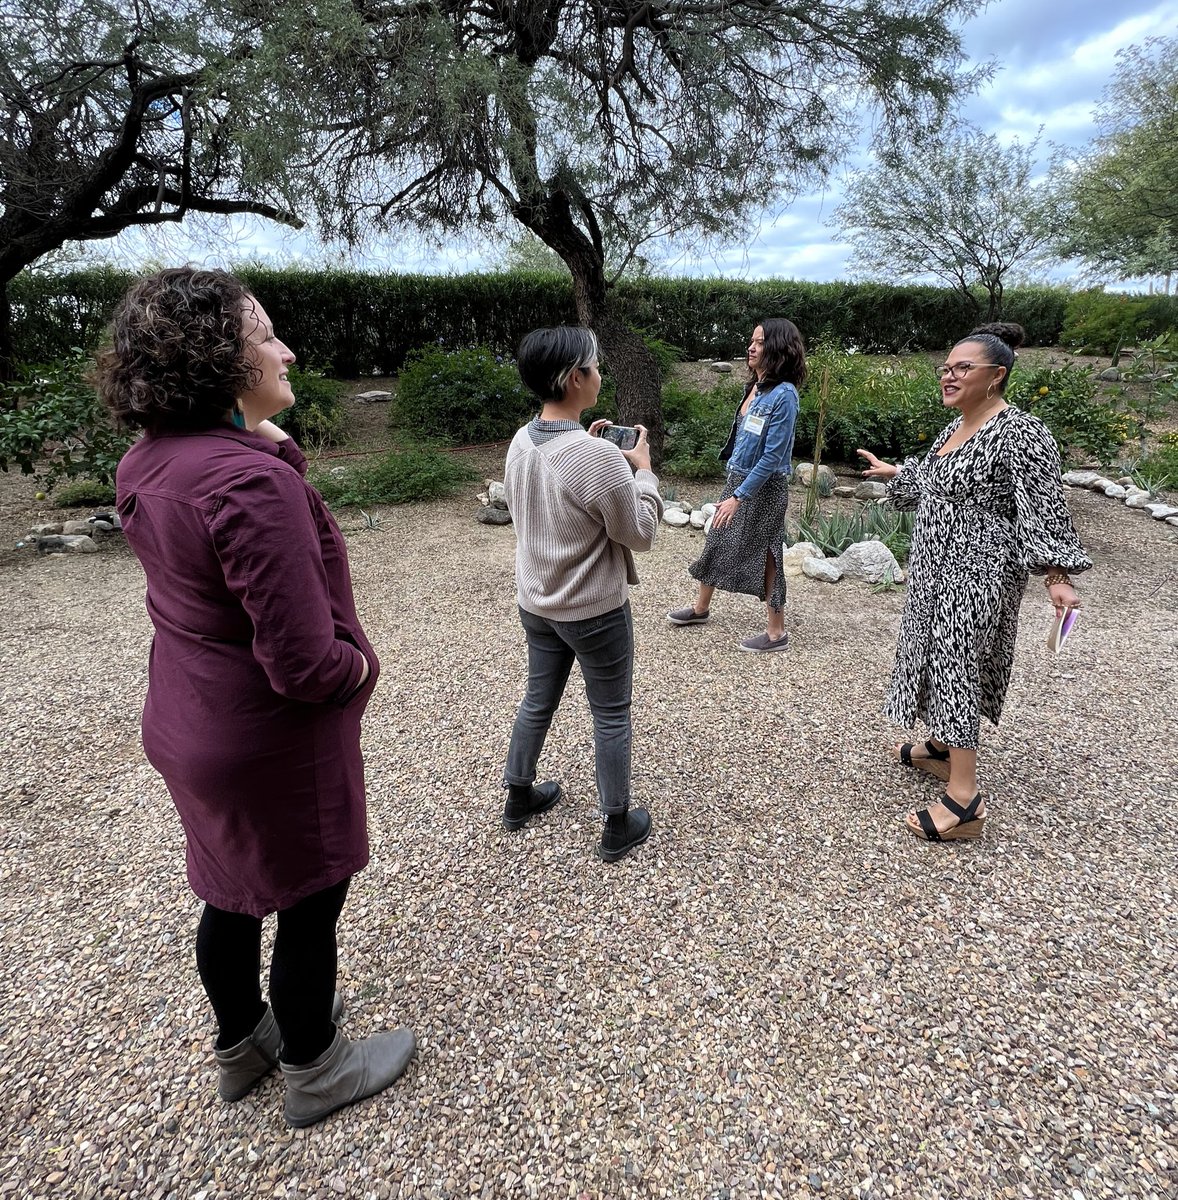 Want to learn more about what’s going to happen in February at the #ALPTucson2023 Convening? Stay tuned, we’ll be sharing short videos soon! Until then, learn more here: conta.cc/3sVyYOe